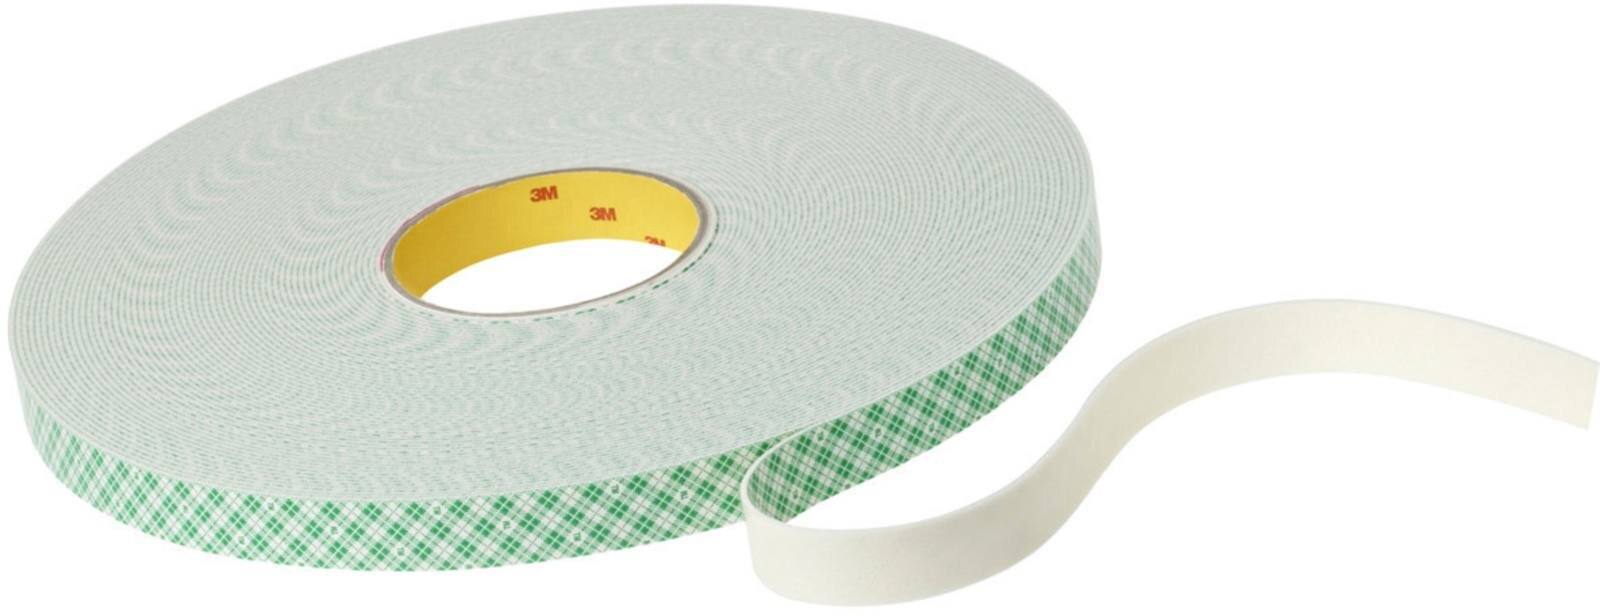 3M PU foam adhesive tape with acrylic adhesive 4008, beige, 50 mm x 33 m, 3.2 mm